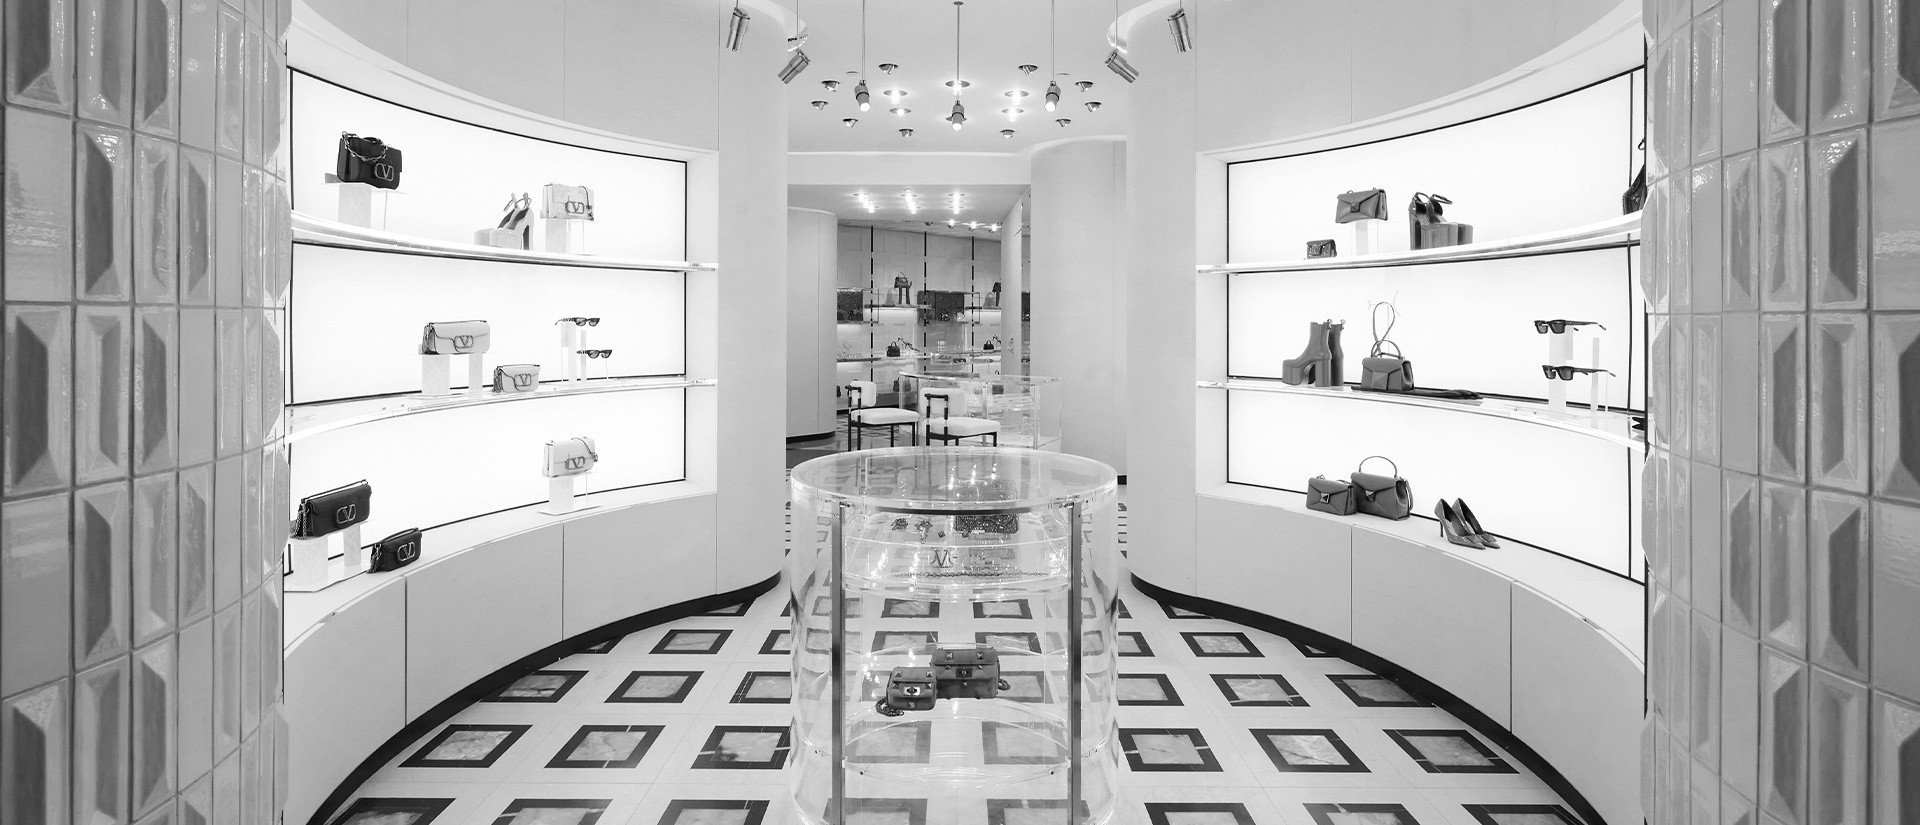 BAGS AND SHOES ON DISPLAY AT LOUIS VUITTON BOUTIQUE IN SPAGNA